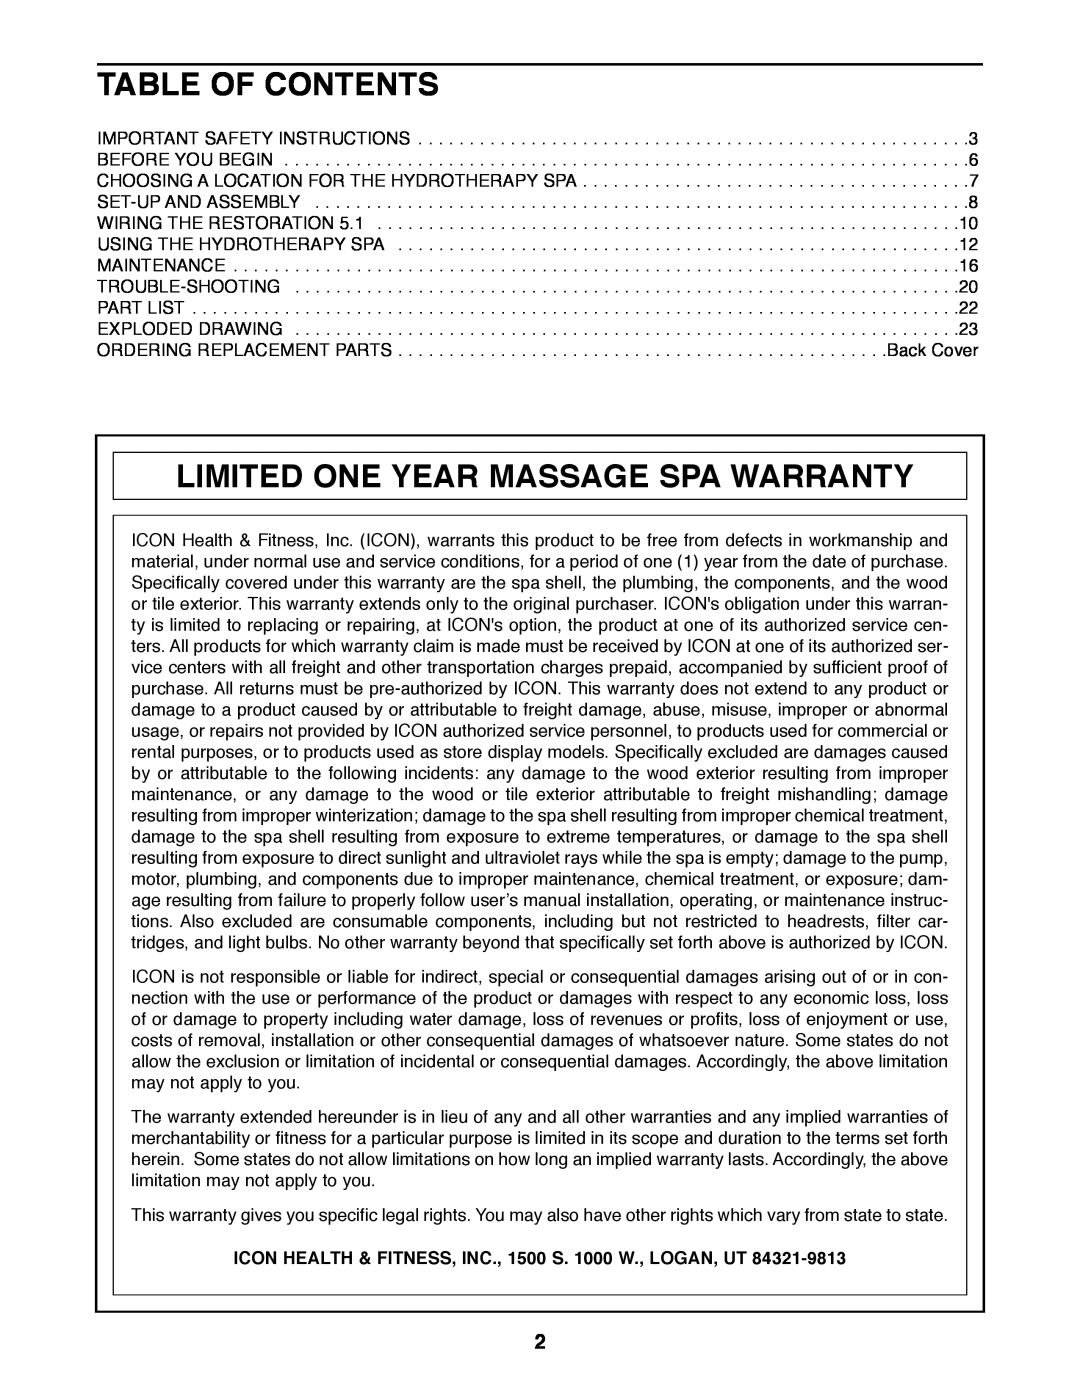 ProForm 831.210051 manual Table Of Contents, Limited One Year Massage Spa Warranty 